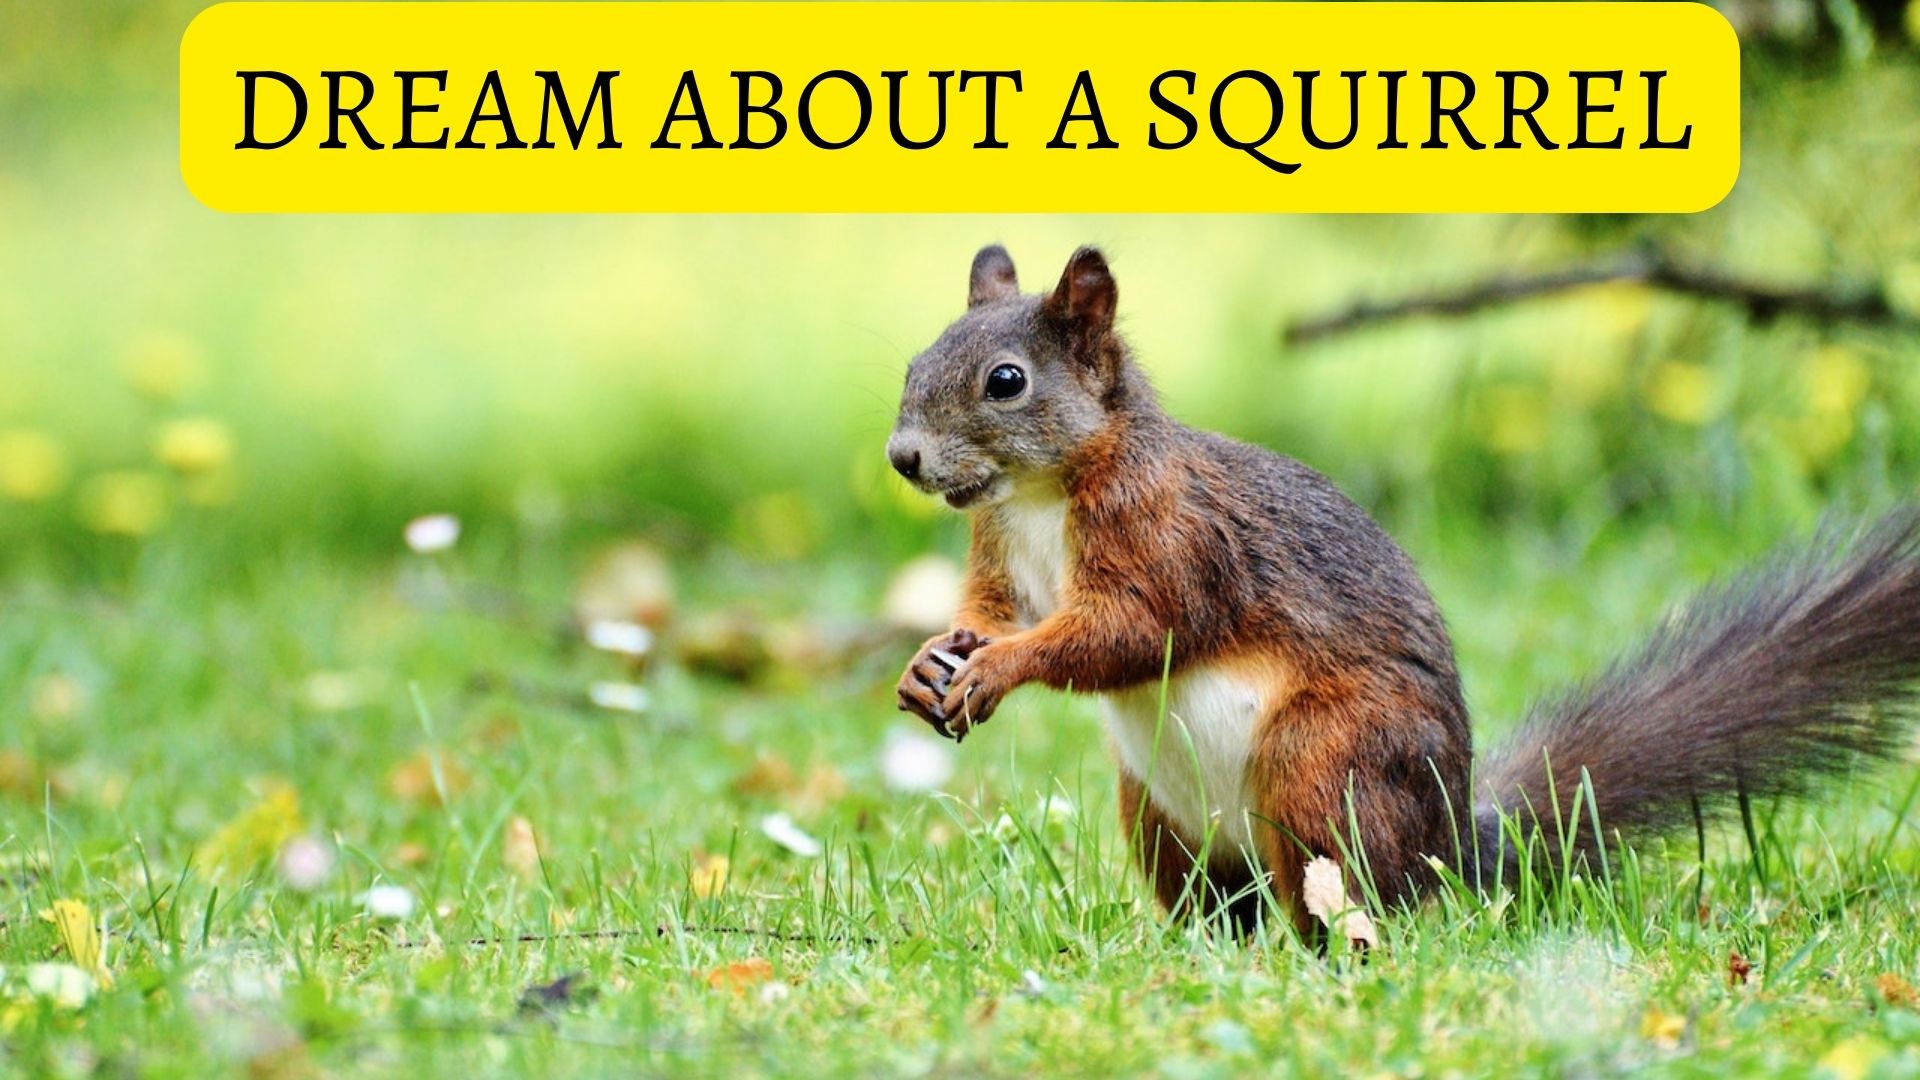 Dream About A Squirrel - Typically Signifies Abundance